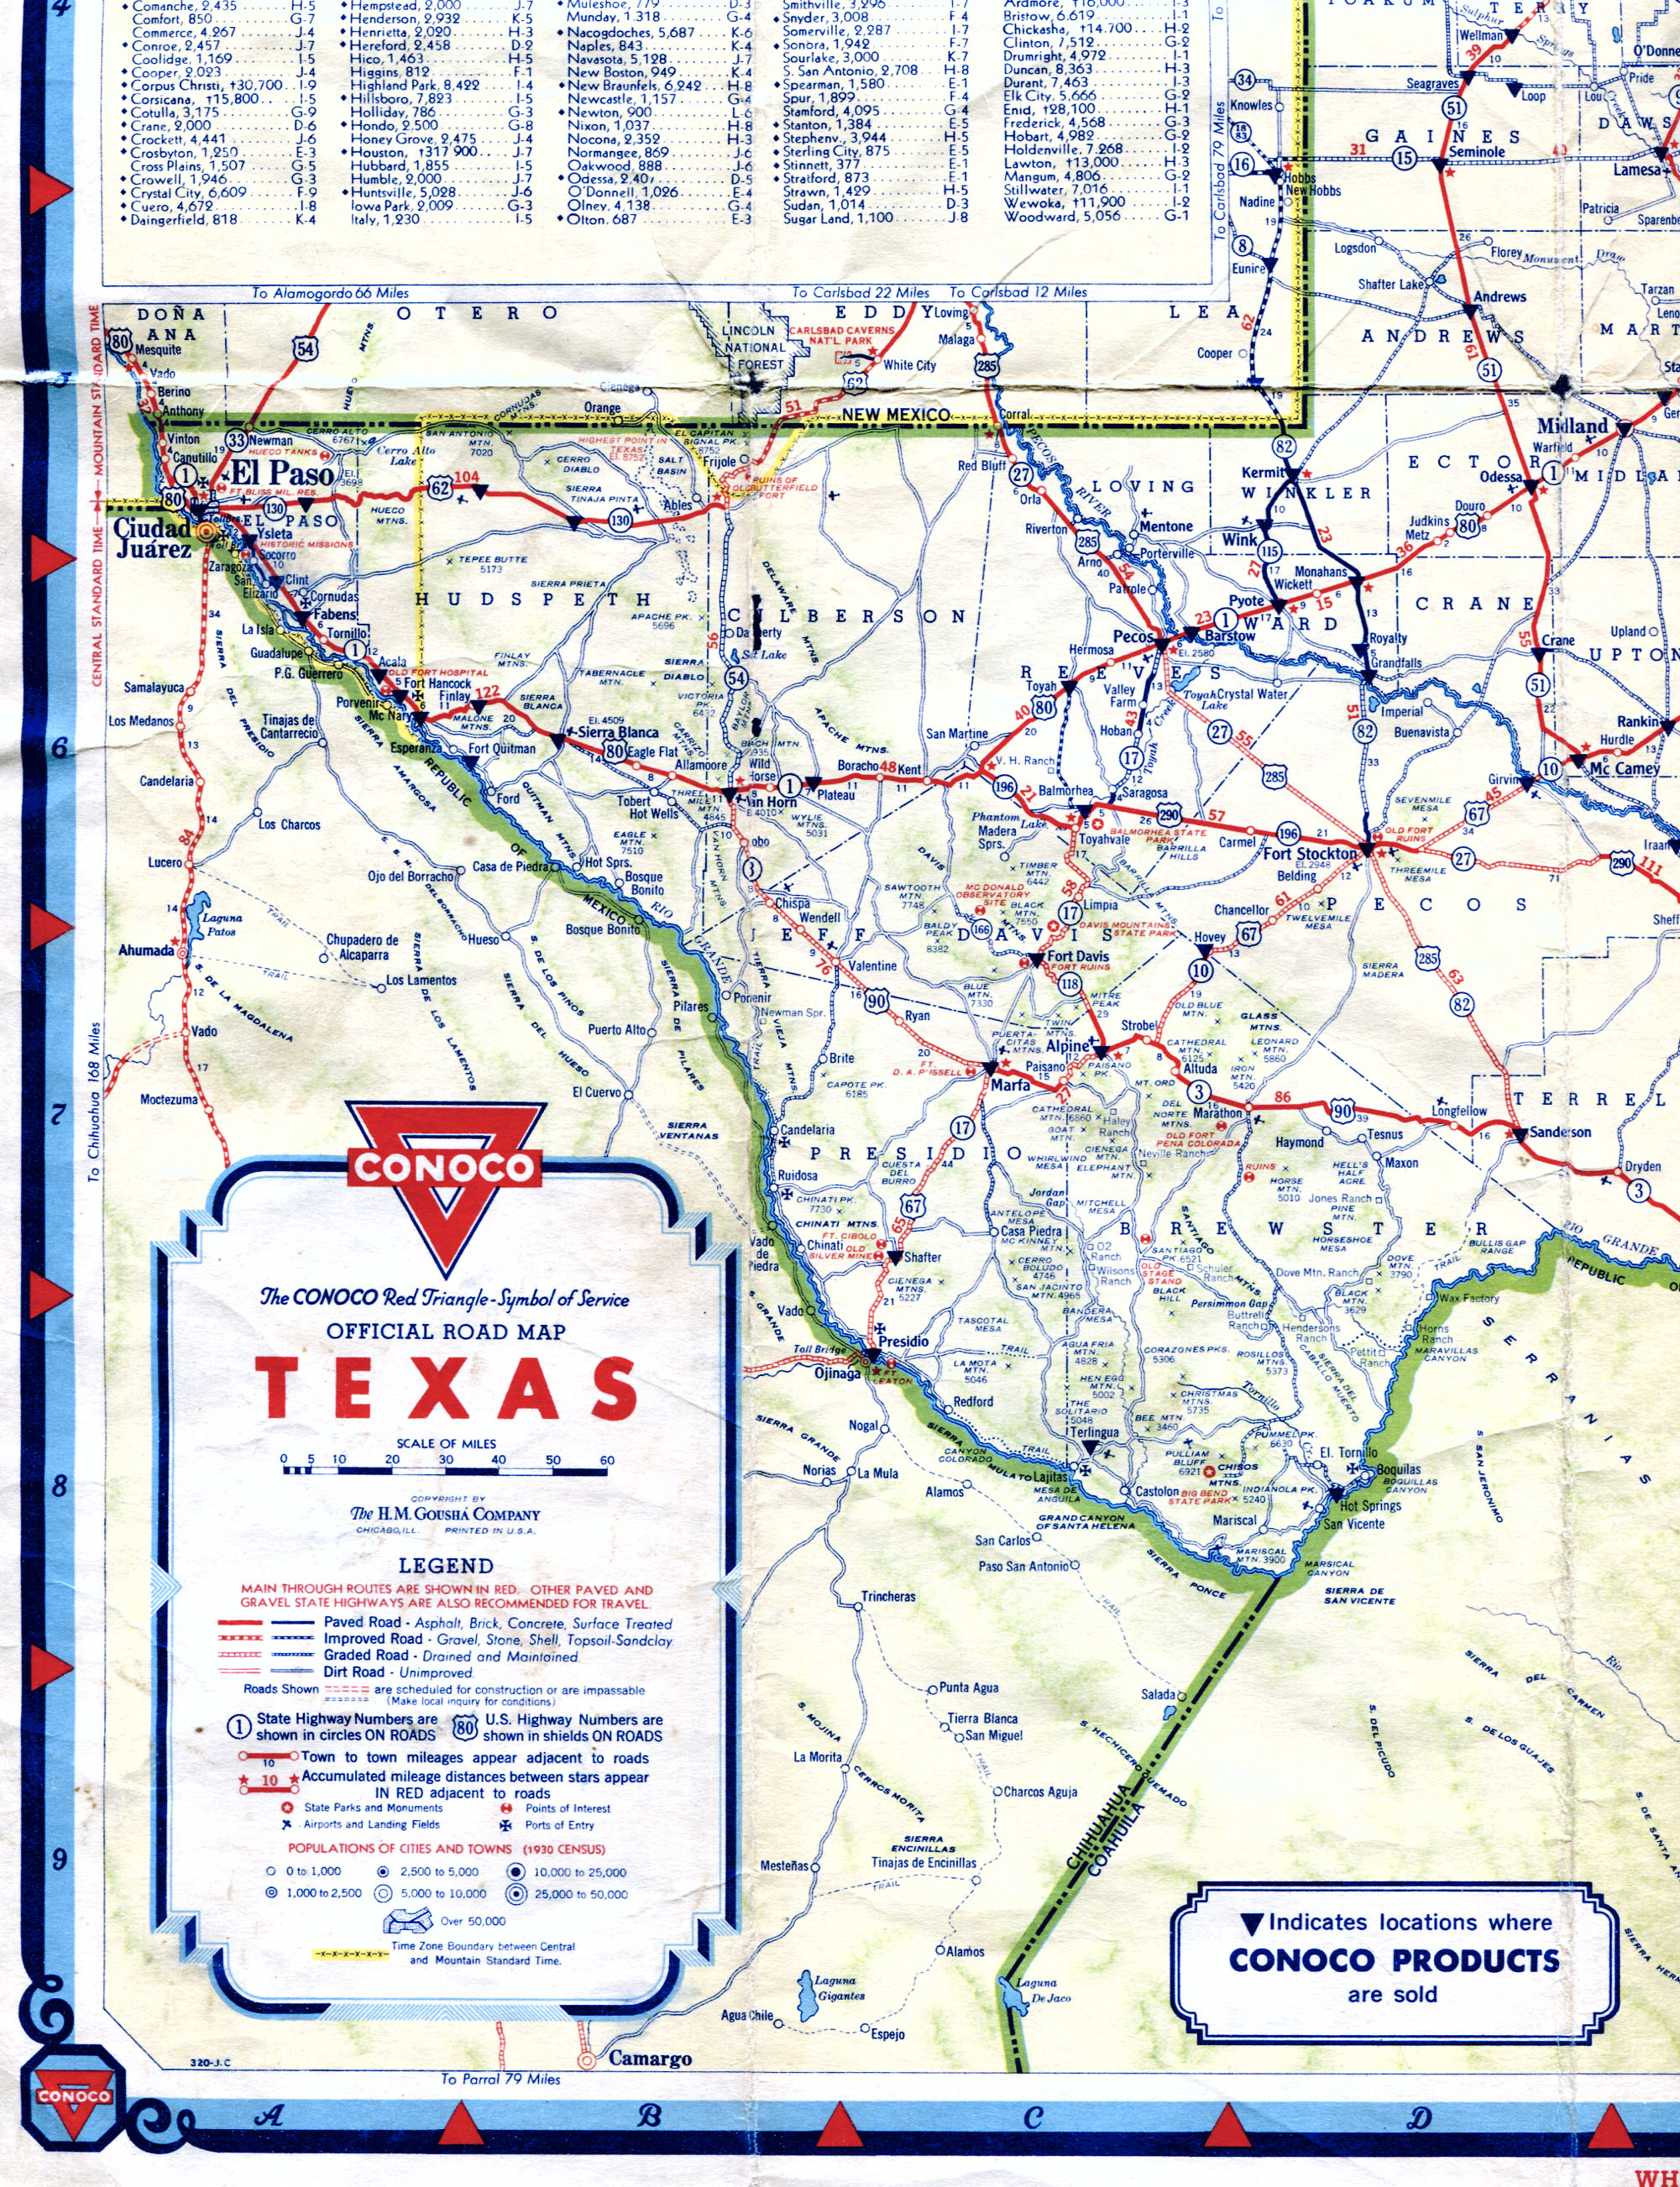 Old Highway Maps Of Texas - Dallas Texas Highway Map